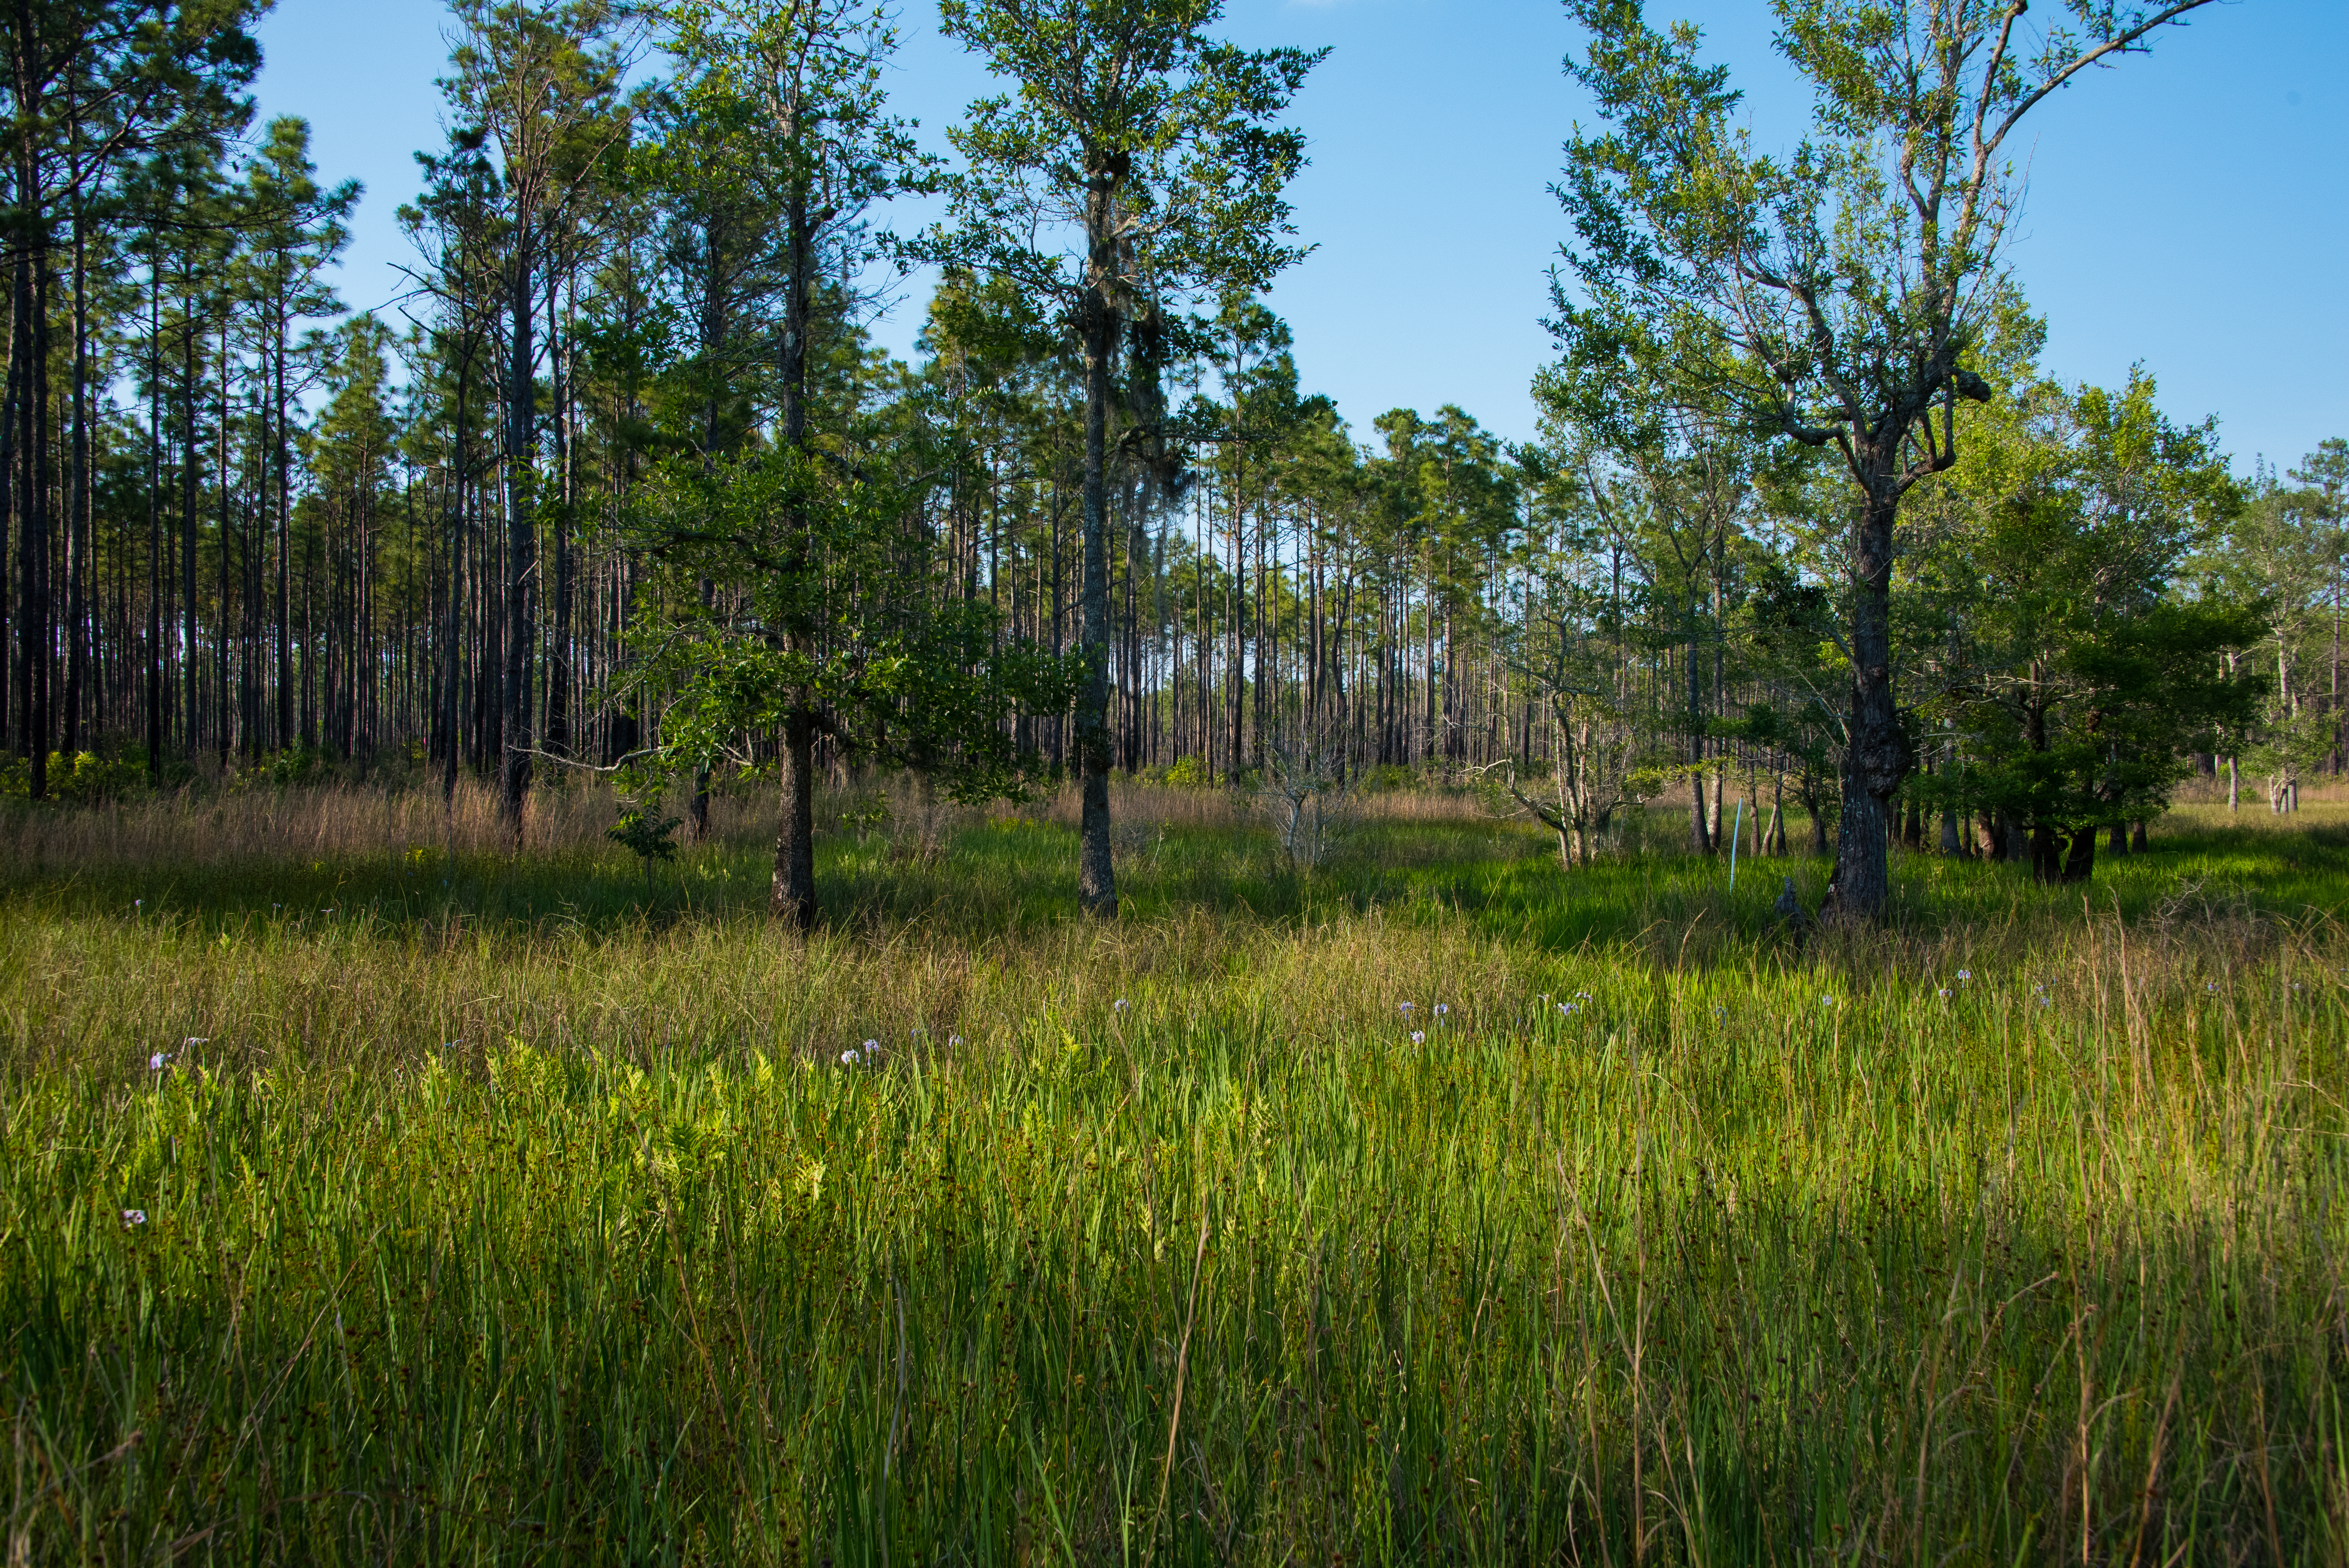 Tall, green grasses with longleaf pines and blue sky in the background.